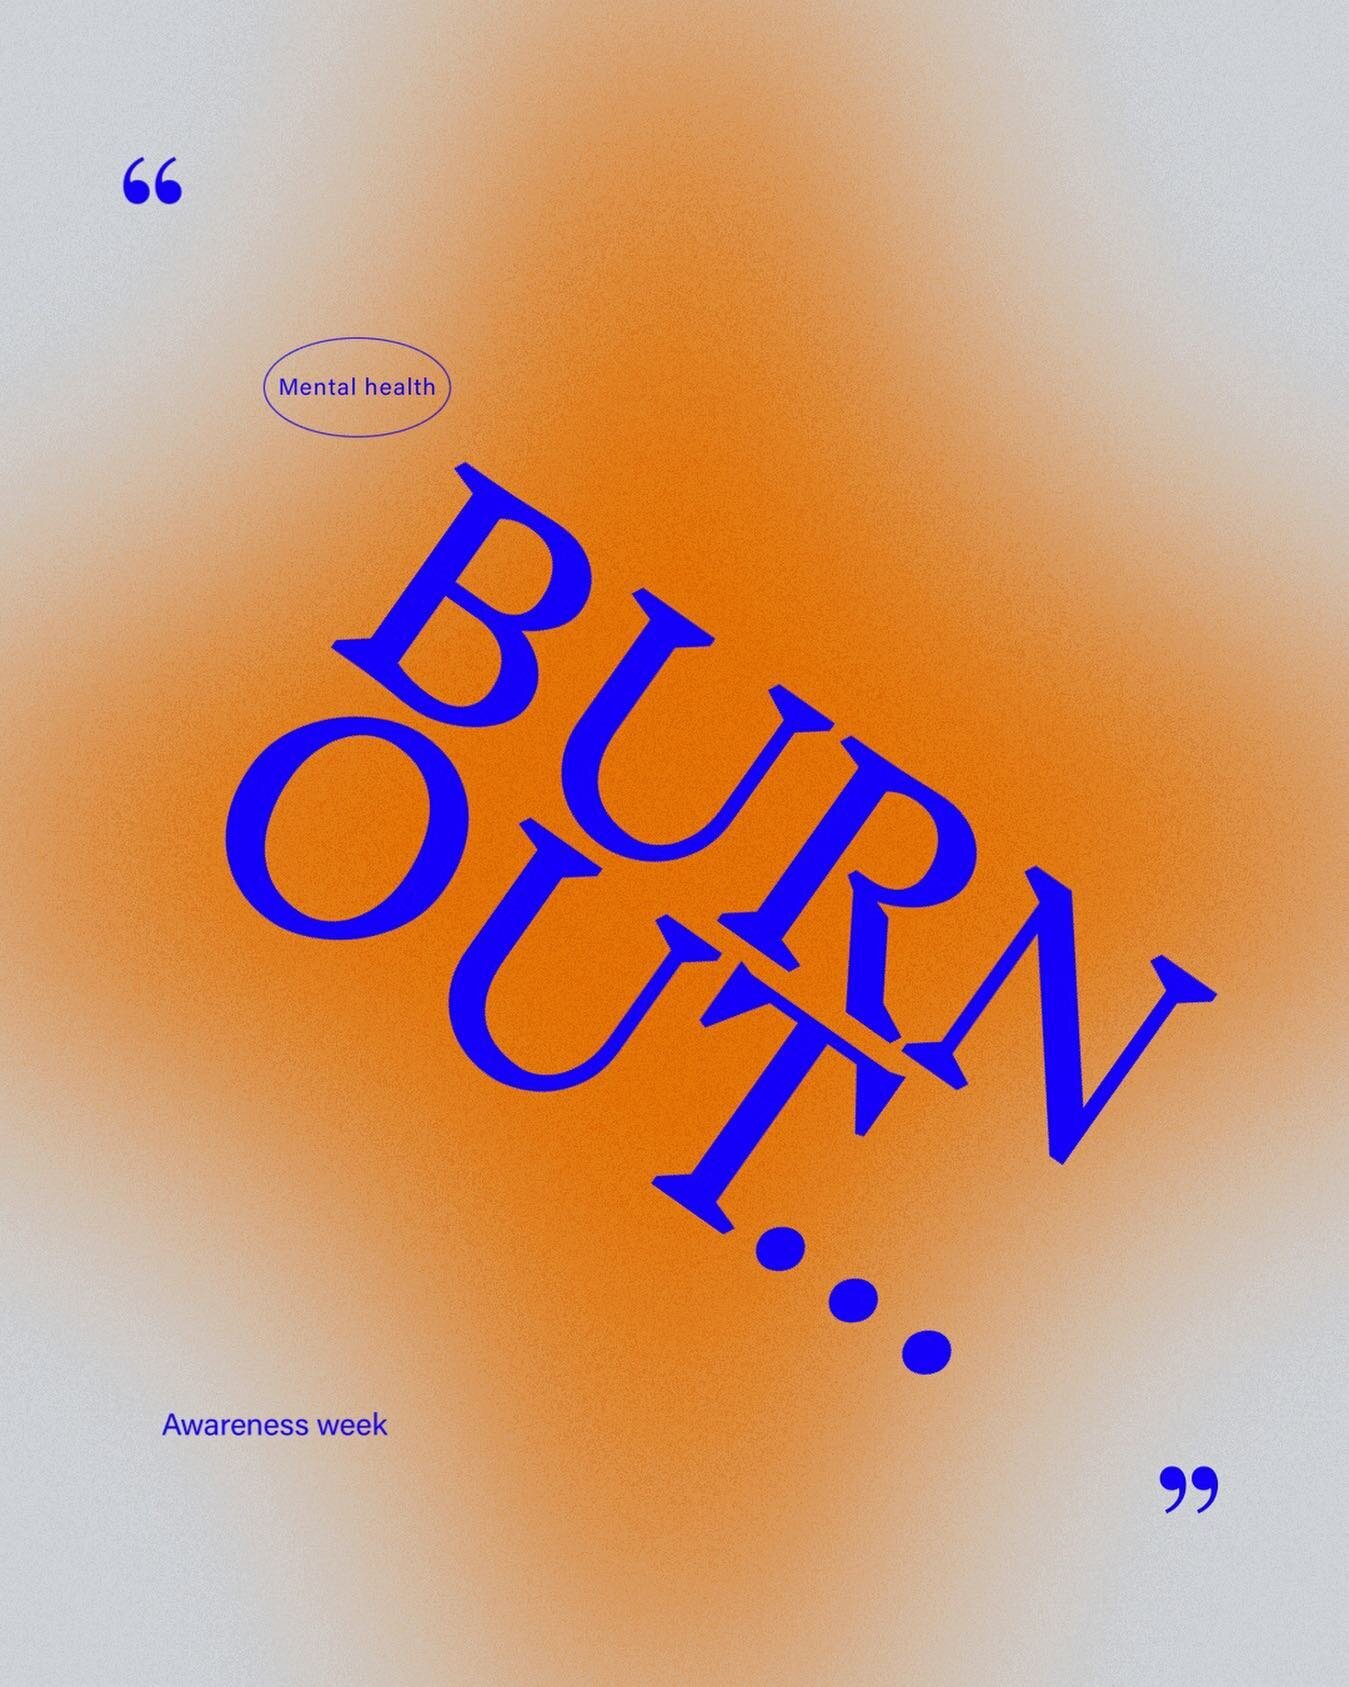 BURNOUT⚡️⚡️🔥🔥

I did not recognise my signs of burnout until I was very unwell. I had pains down my arms and sides my muscles went into spasm. I was shallow breathing and caught in fight or flight. I felt nothing except a heightened sense of impend